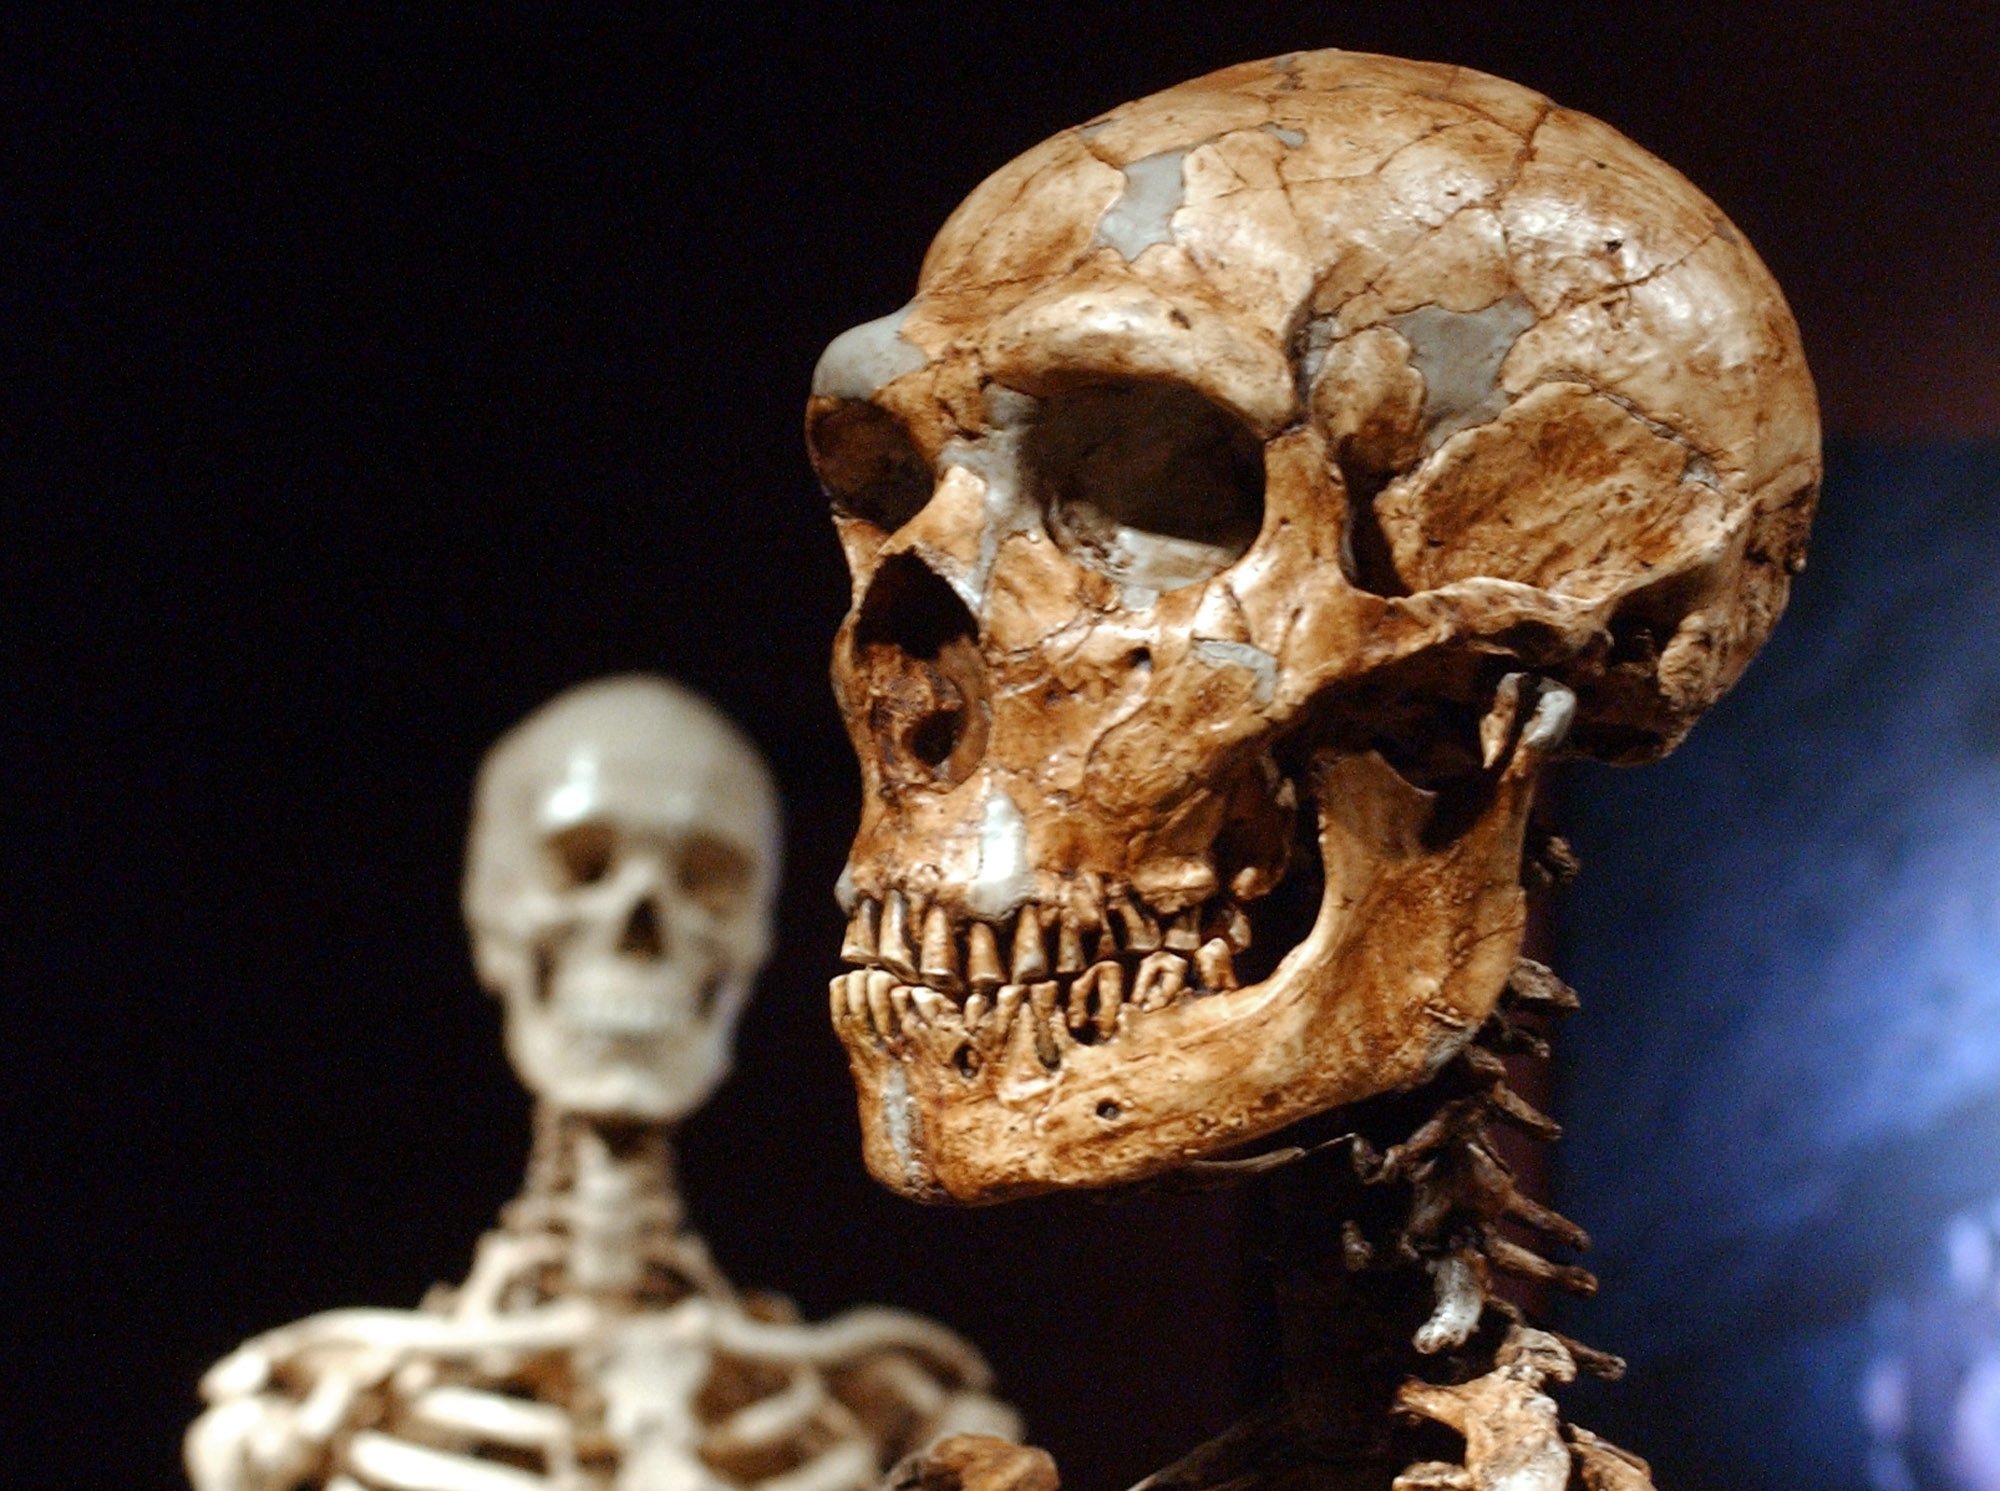 From right: A reconstructed Neanderthal skeleton and a modern human version of a skeleton, on display at the Museum of Natural History in New York City, on Jan. 8, 2003. 